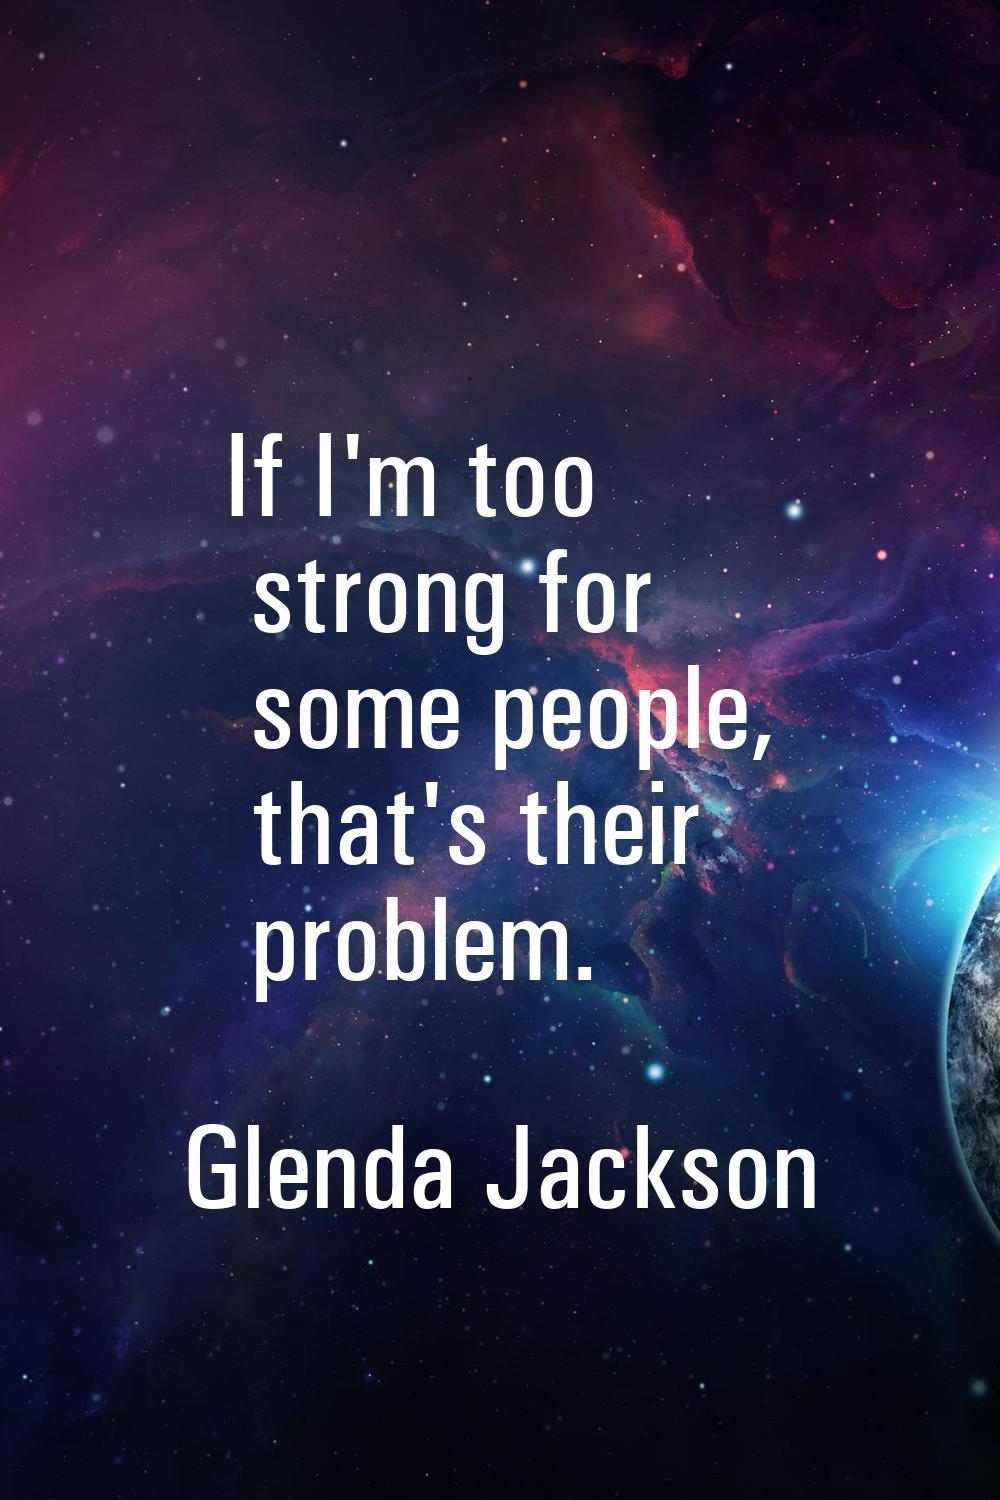 If I'm too strong for some people, that's their problem.